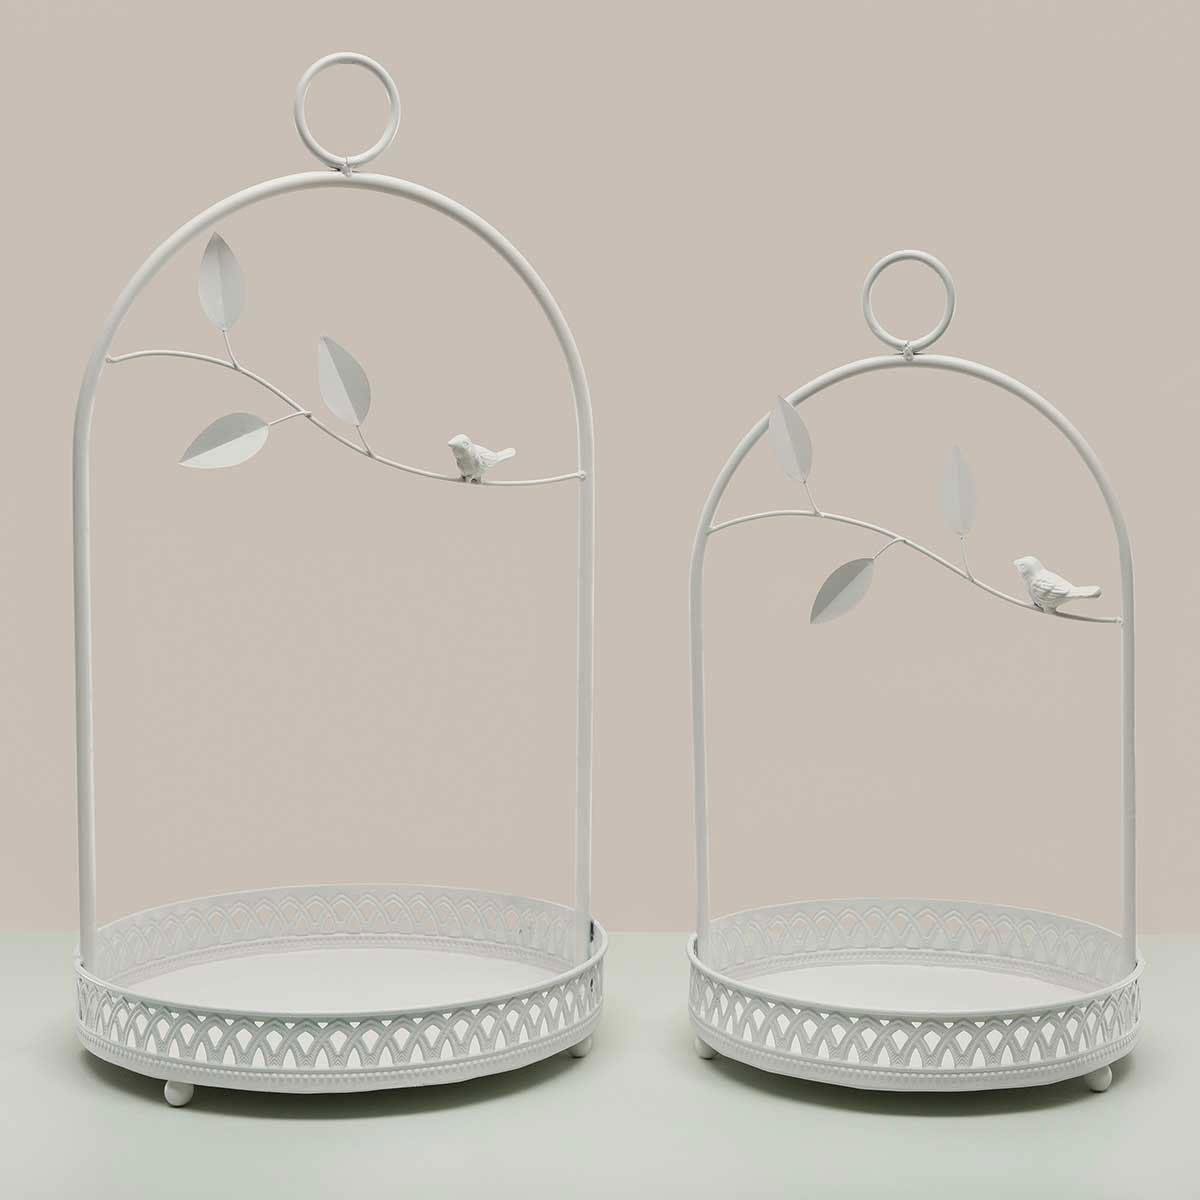 TABLE TRAY BIRD/LEAF SMALL 10IN X 17IN MATTE WHITE METAL